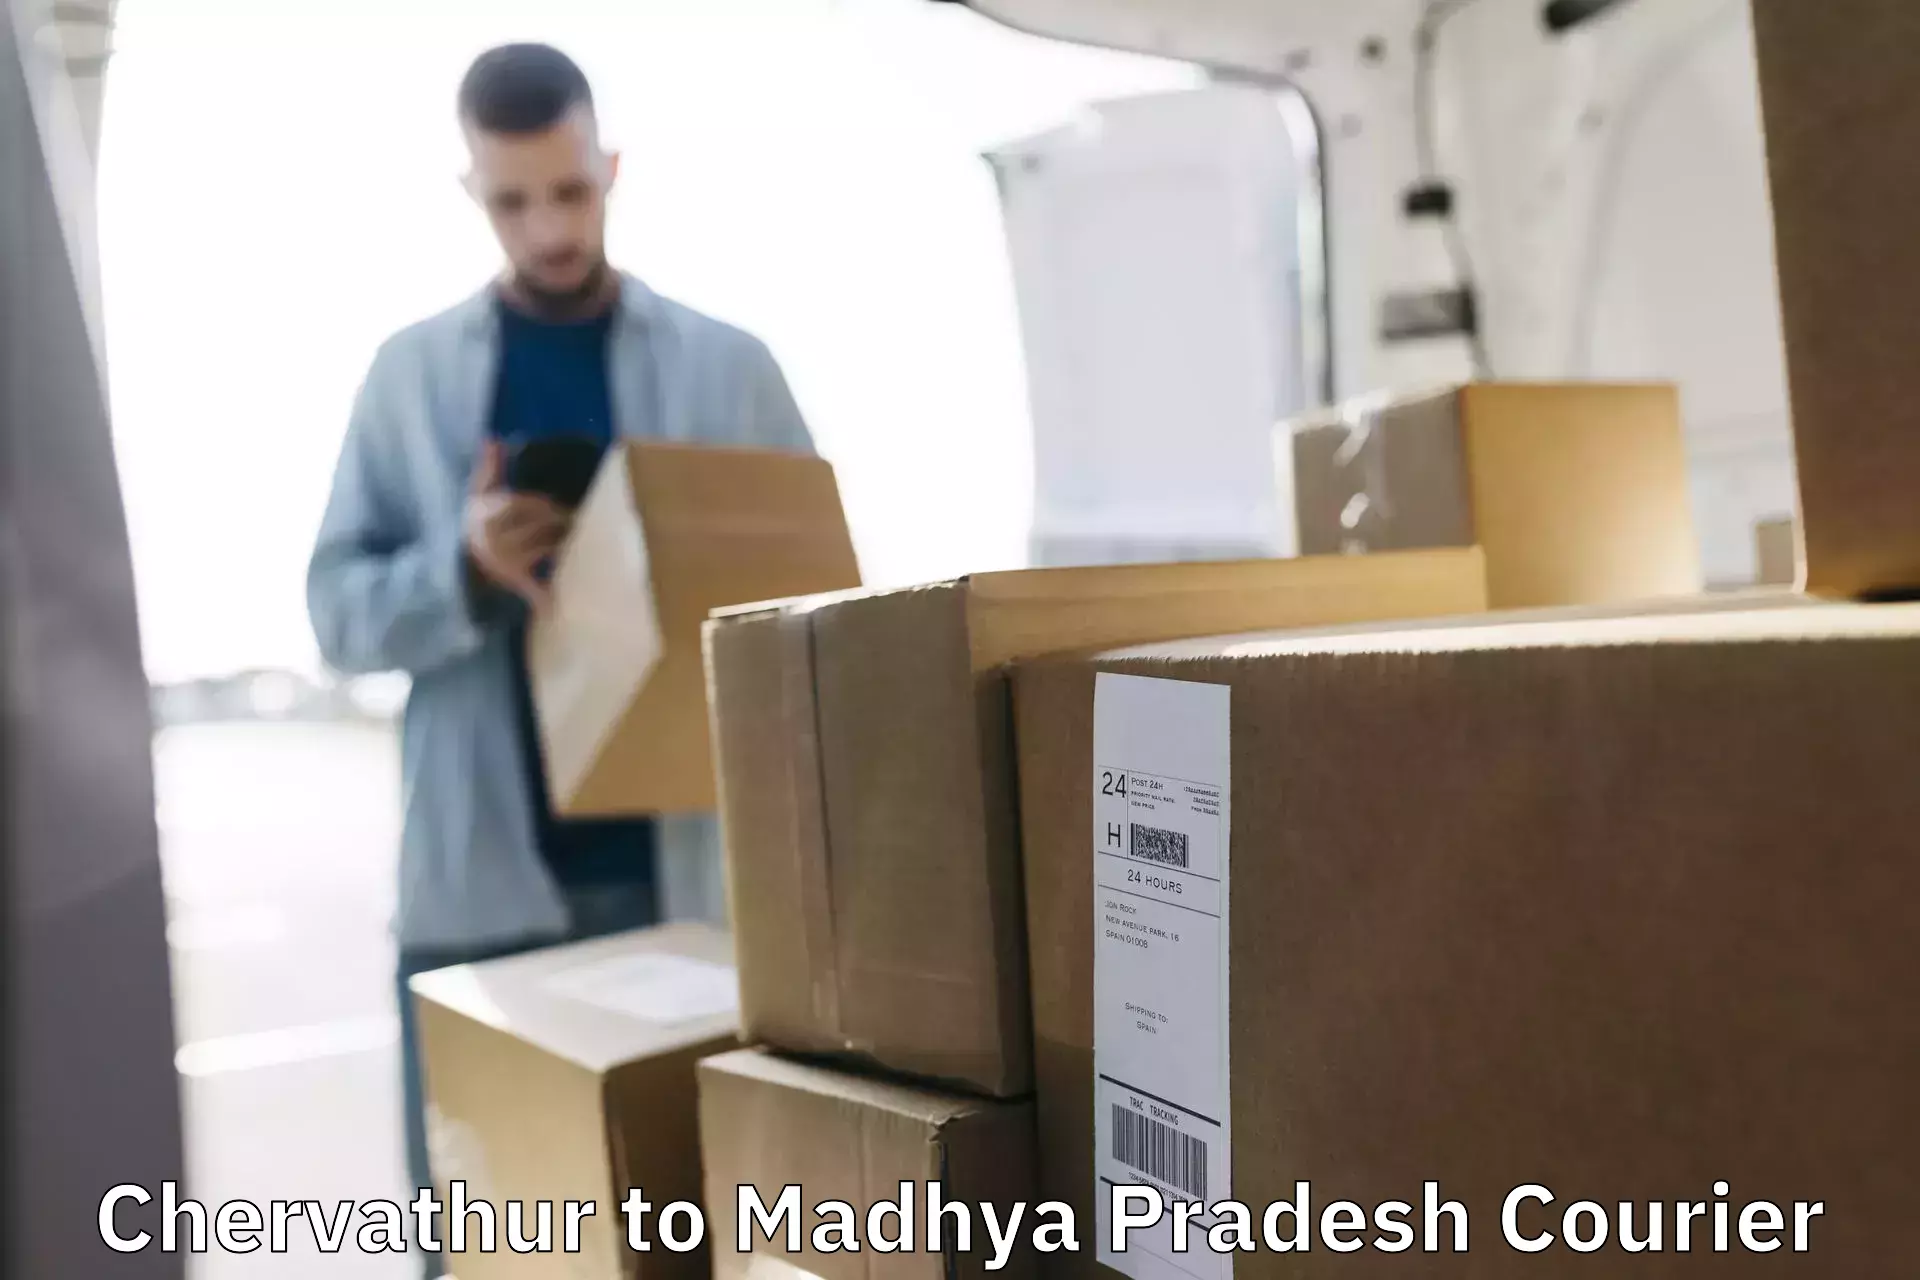 Courier service innovation Chervathur to Indore